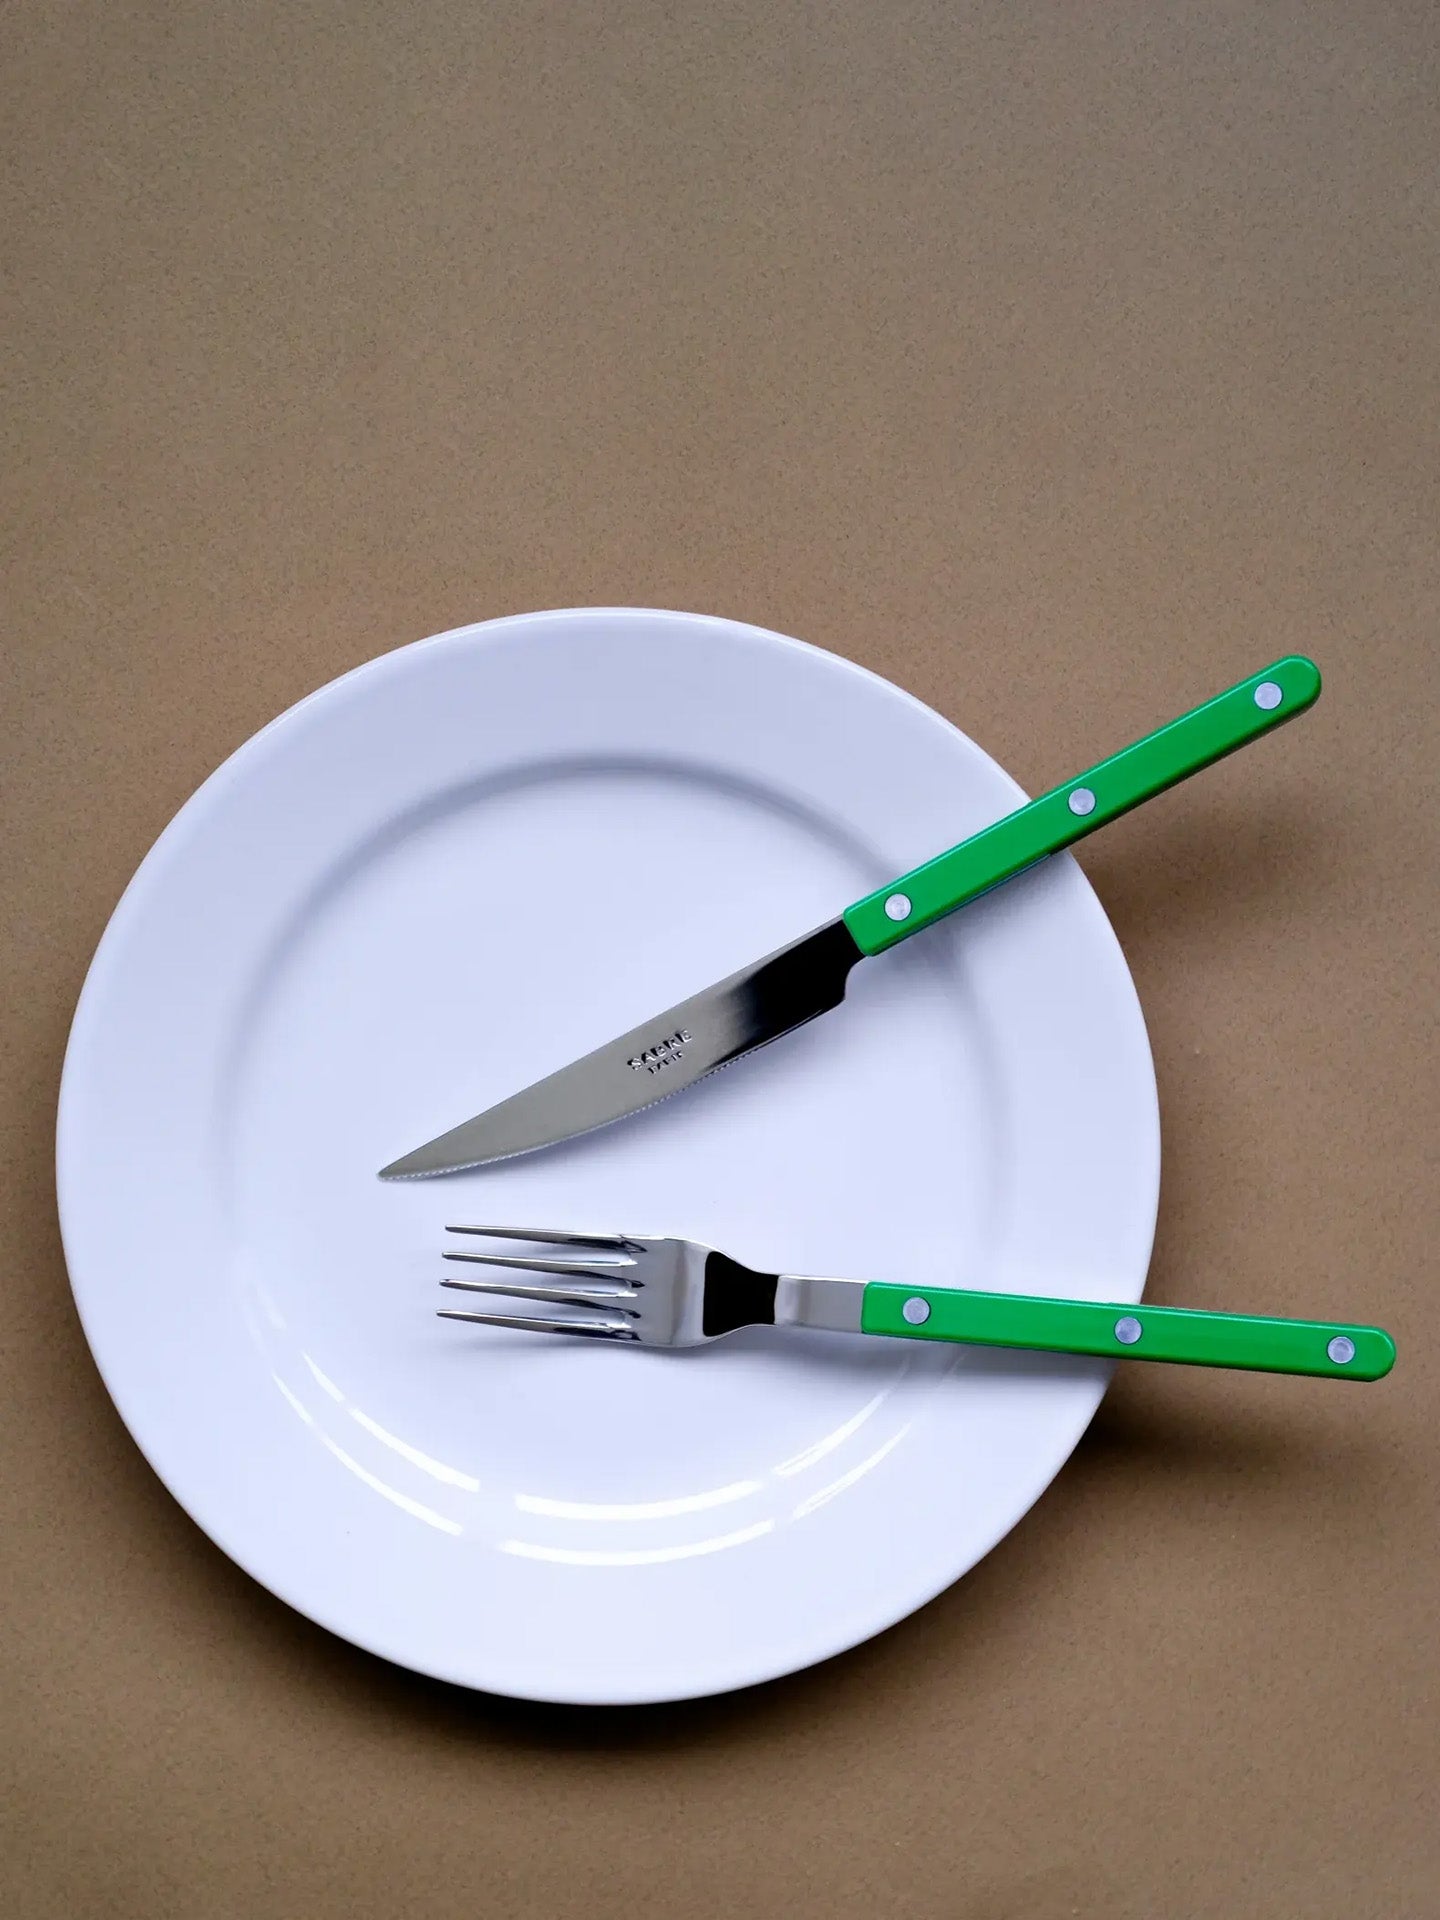 The green Bistrot knife is sleek and the edge is sharp. Great for cutting! Looks amazing, too.